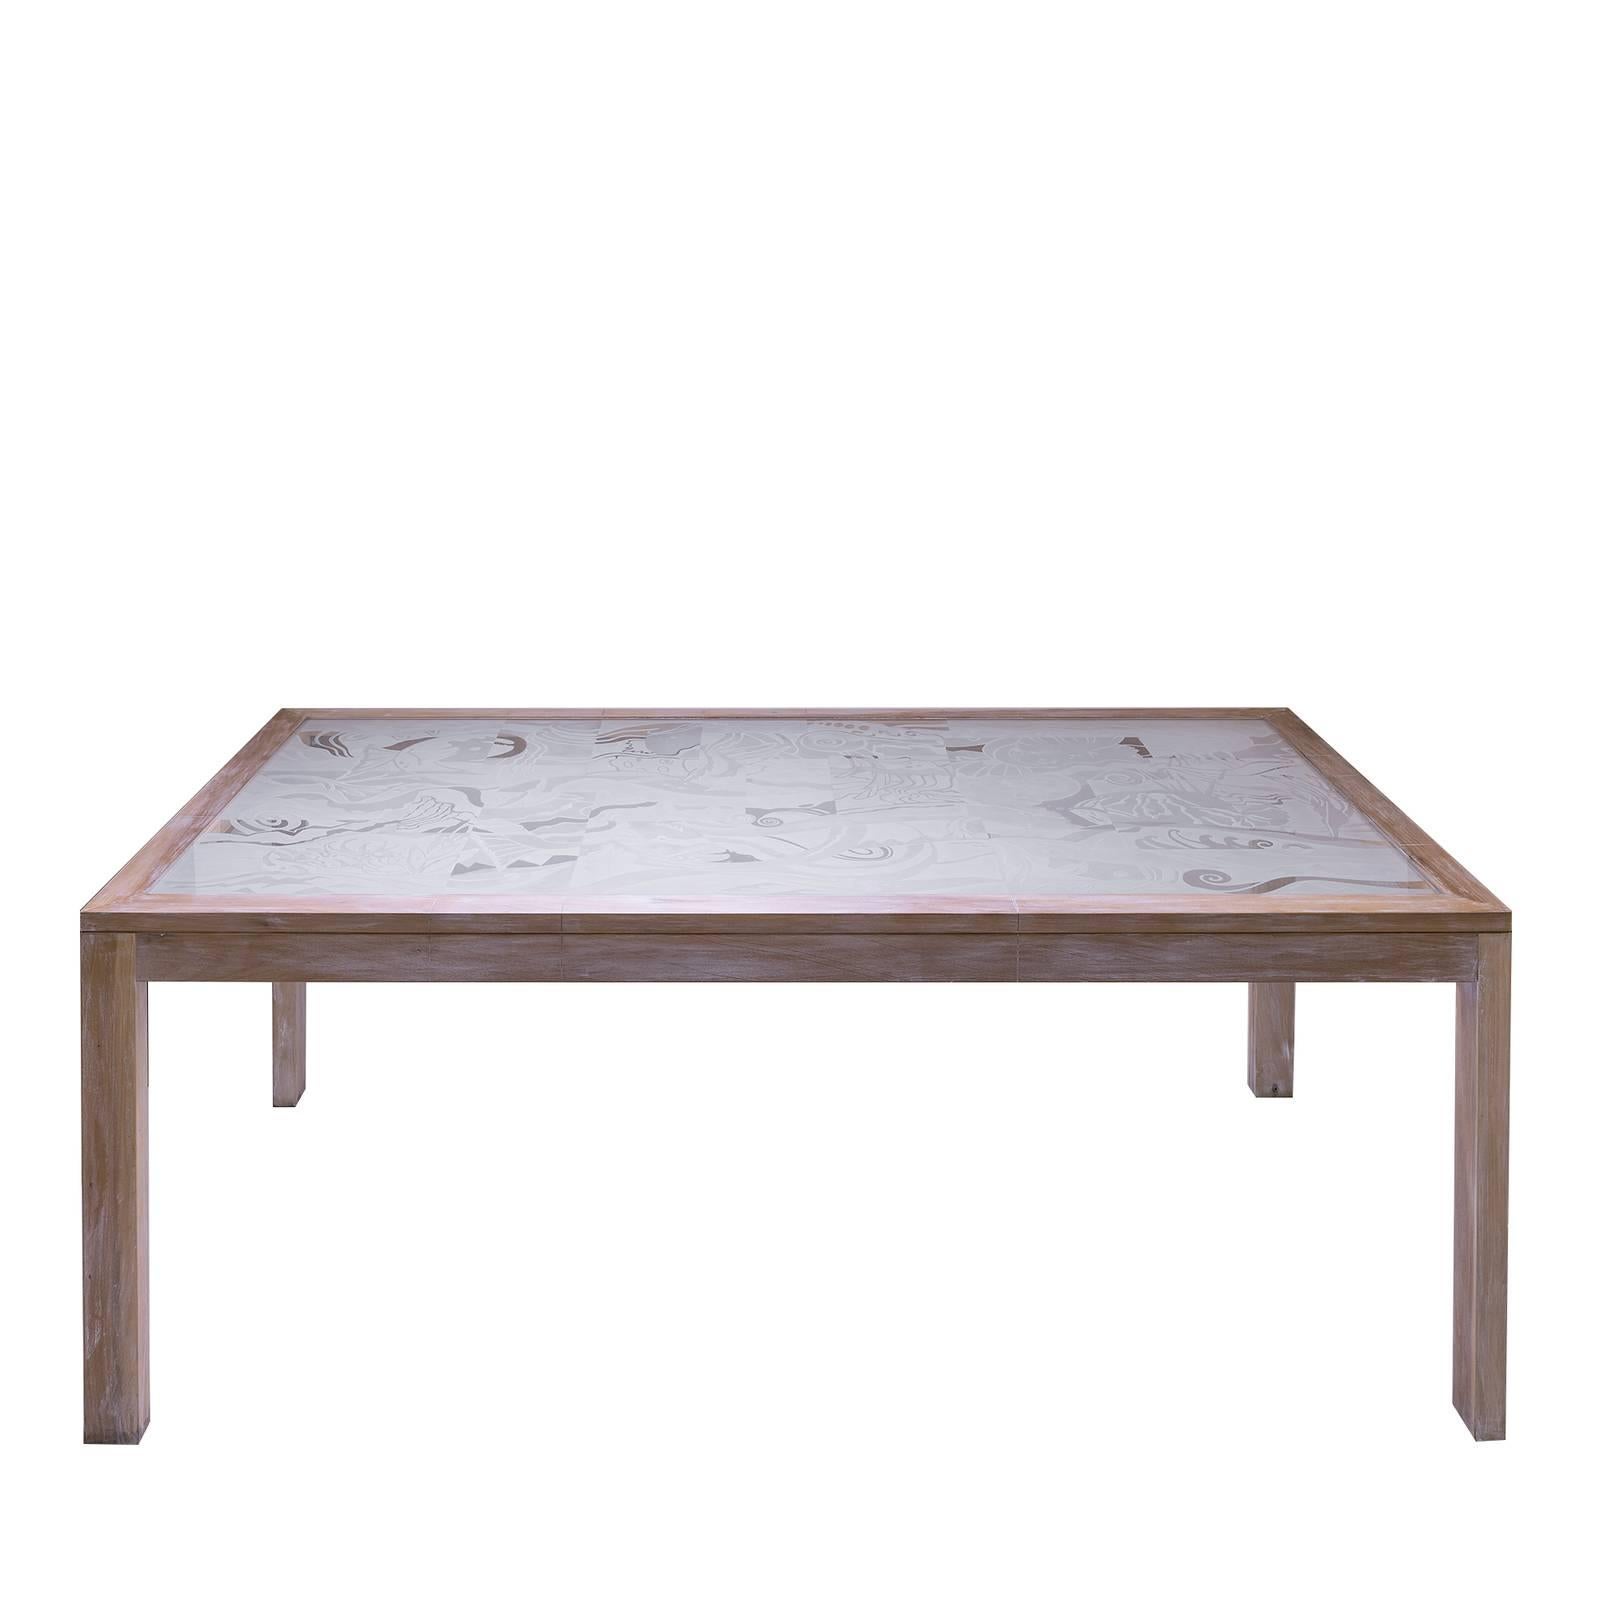 An exquisite reinvention of classic silhouette, this glass table will infuse contemporary flair and refinement into any modern decor. Framed by a lightweight wooden structure, the glass table top features a bas-relief design of a stormy sea filled